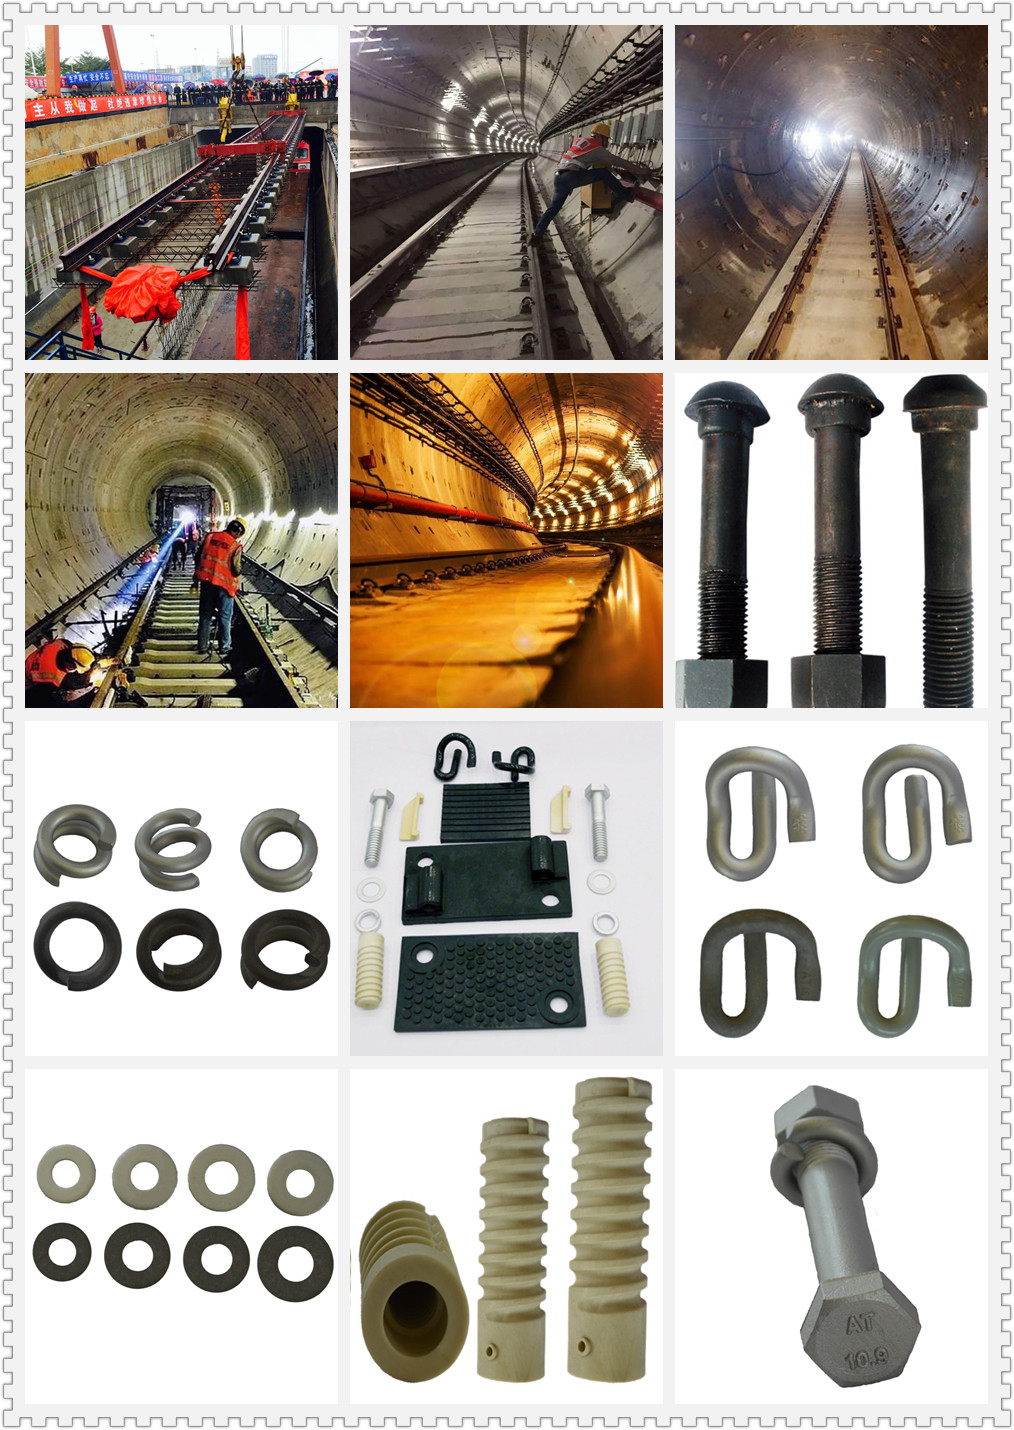 Anyang Railway Equipment Co., Ltd(AT) provided Rail Fasteners, Rail Fastening Systems, Track Bolts for Nanning Metro(Subway) .